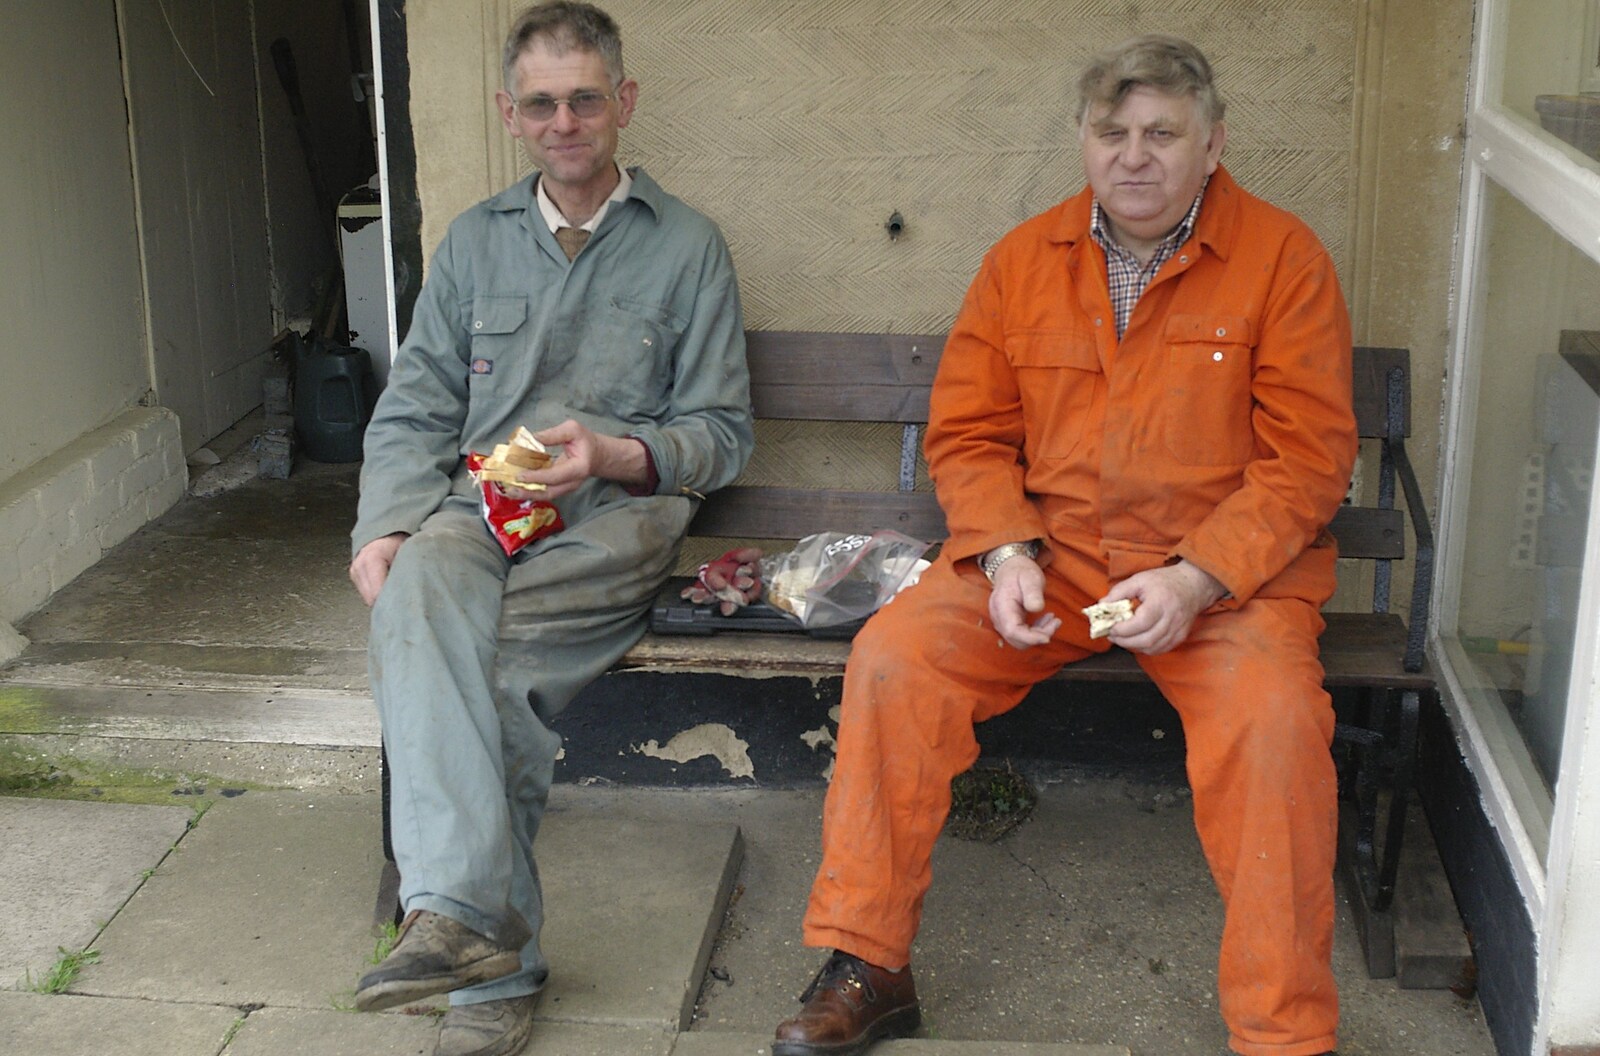 Mick and Richard take time-out for a spot of lunch from An Elegy for a Shed, Hopton, Suffolk - 28th March 2005